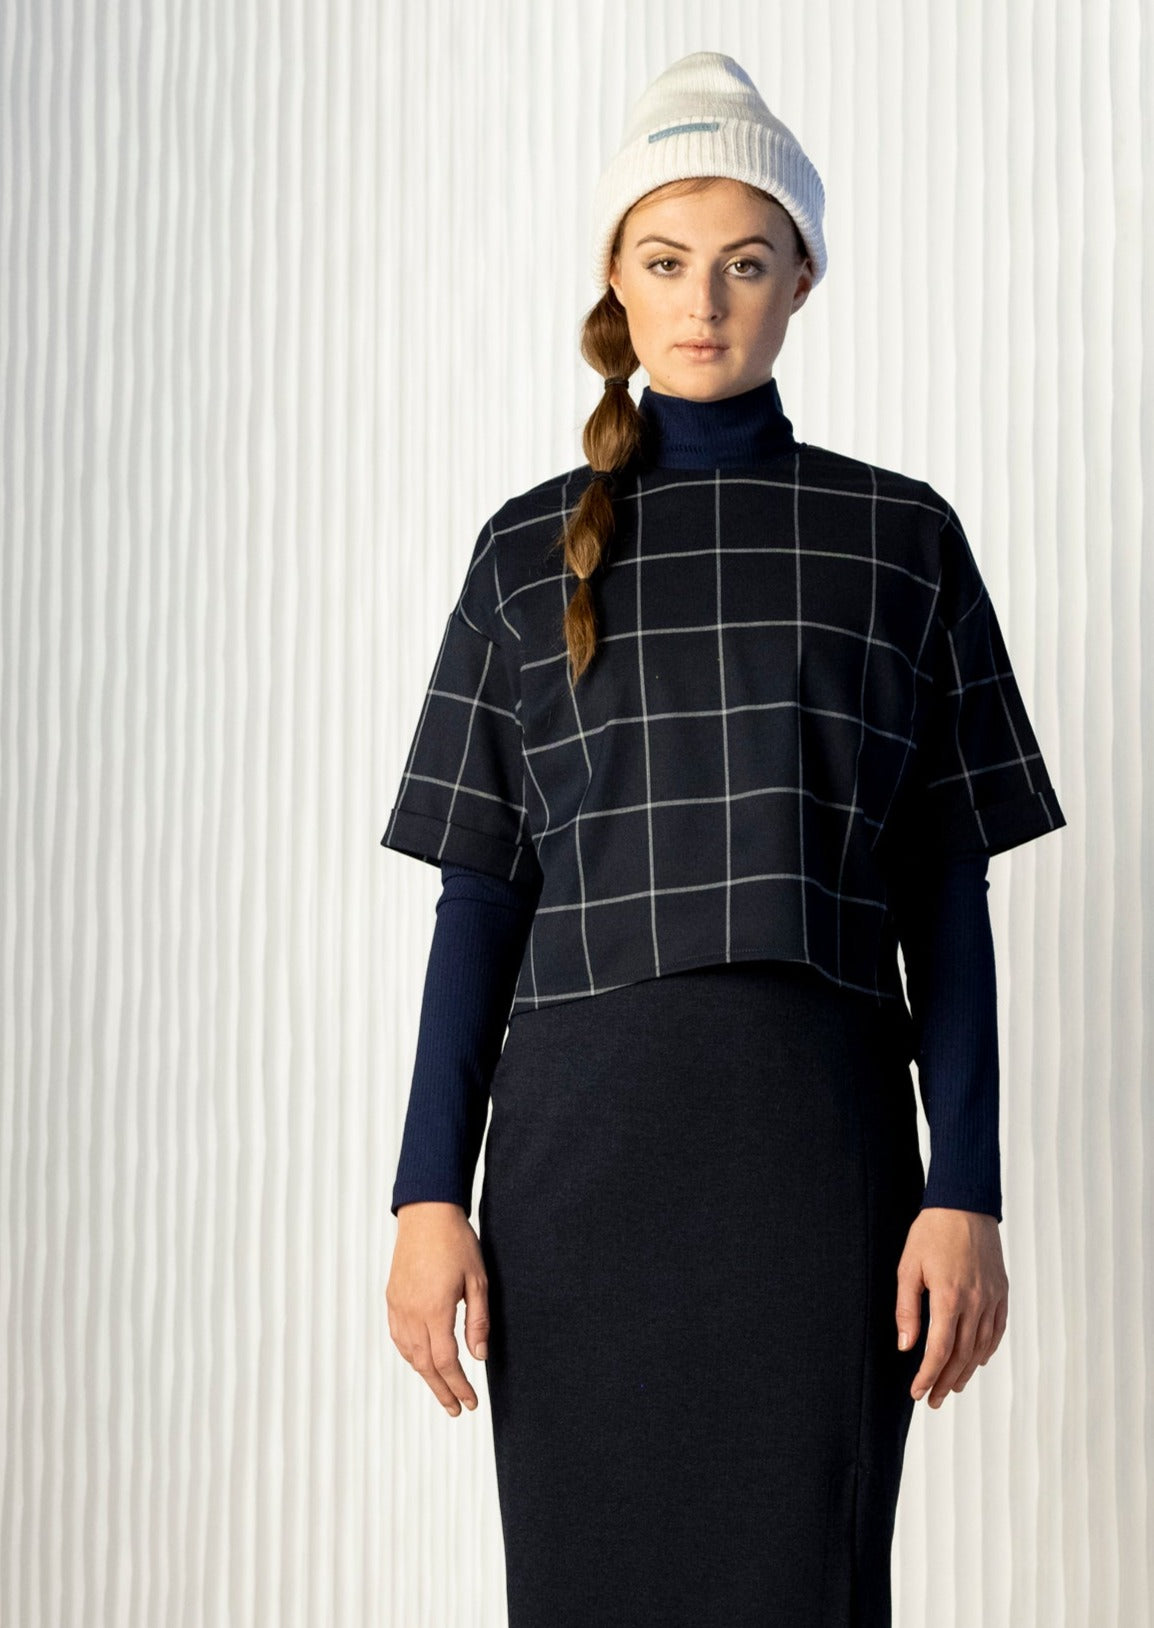 sussex-cropped-navy-top-grid